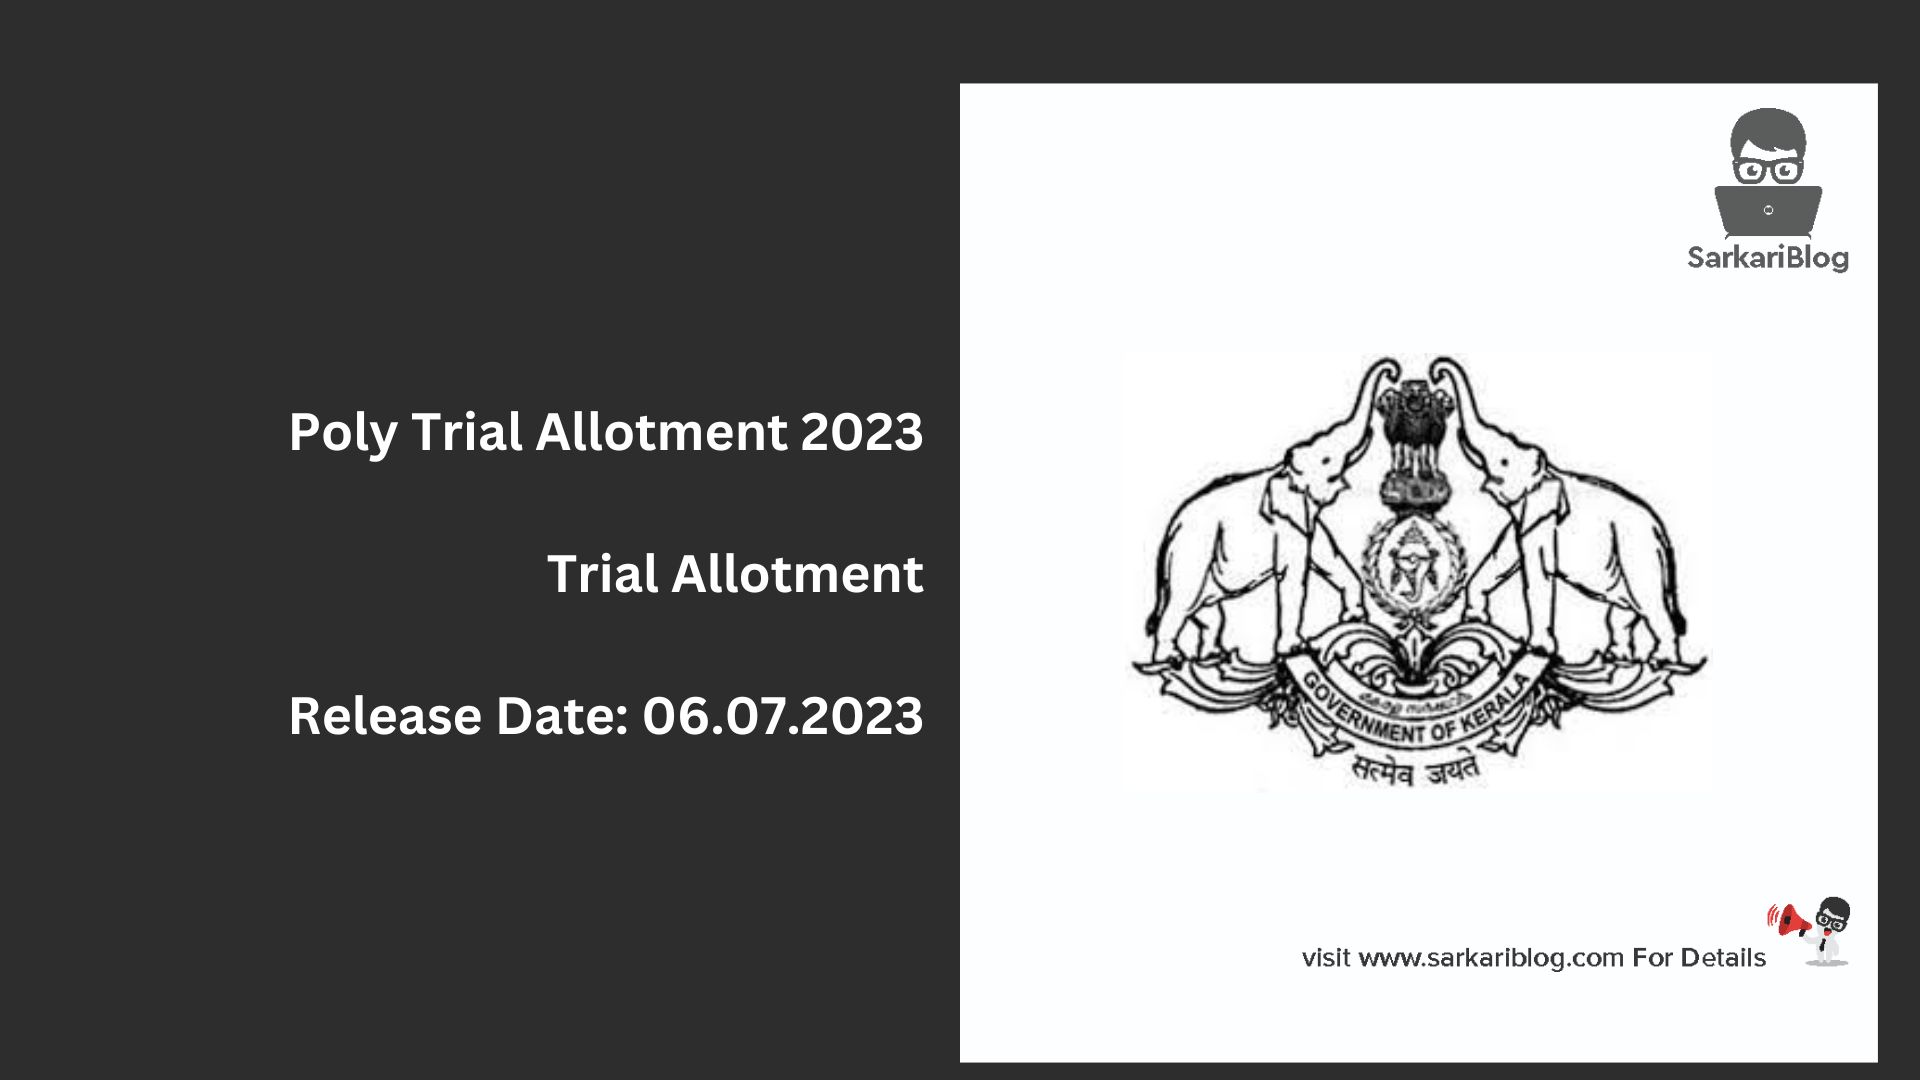 Poly Trial Allotment 2023